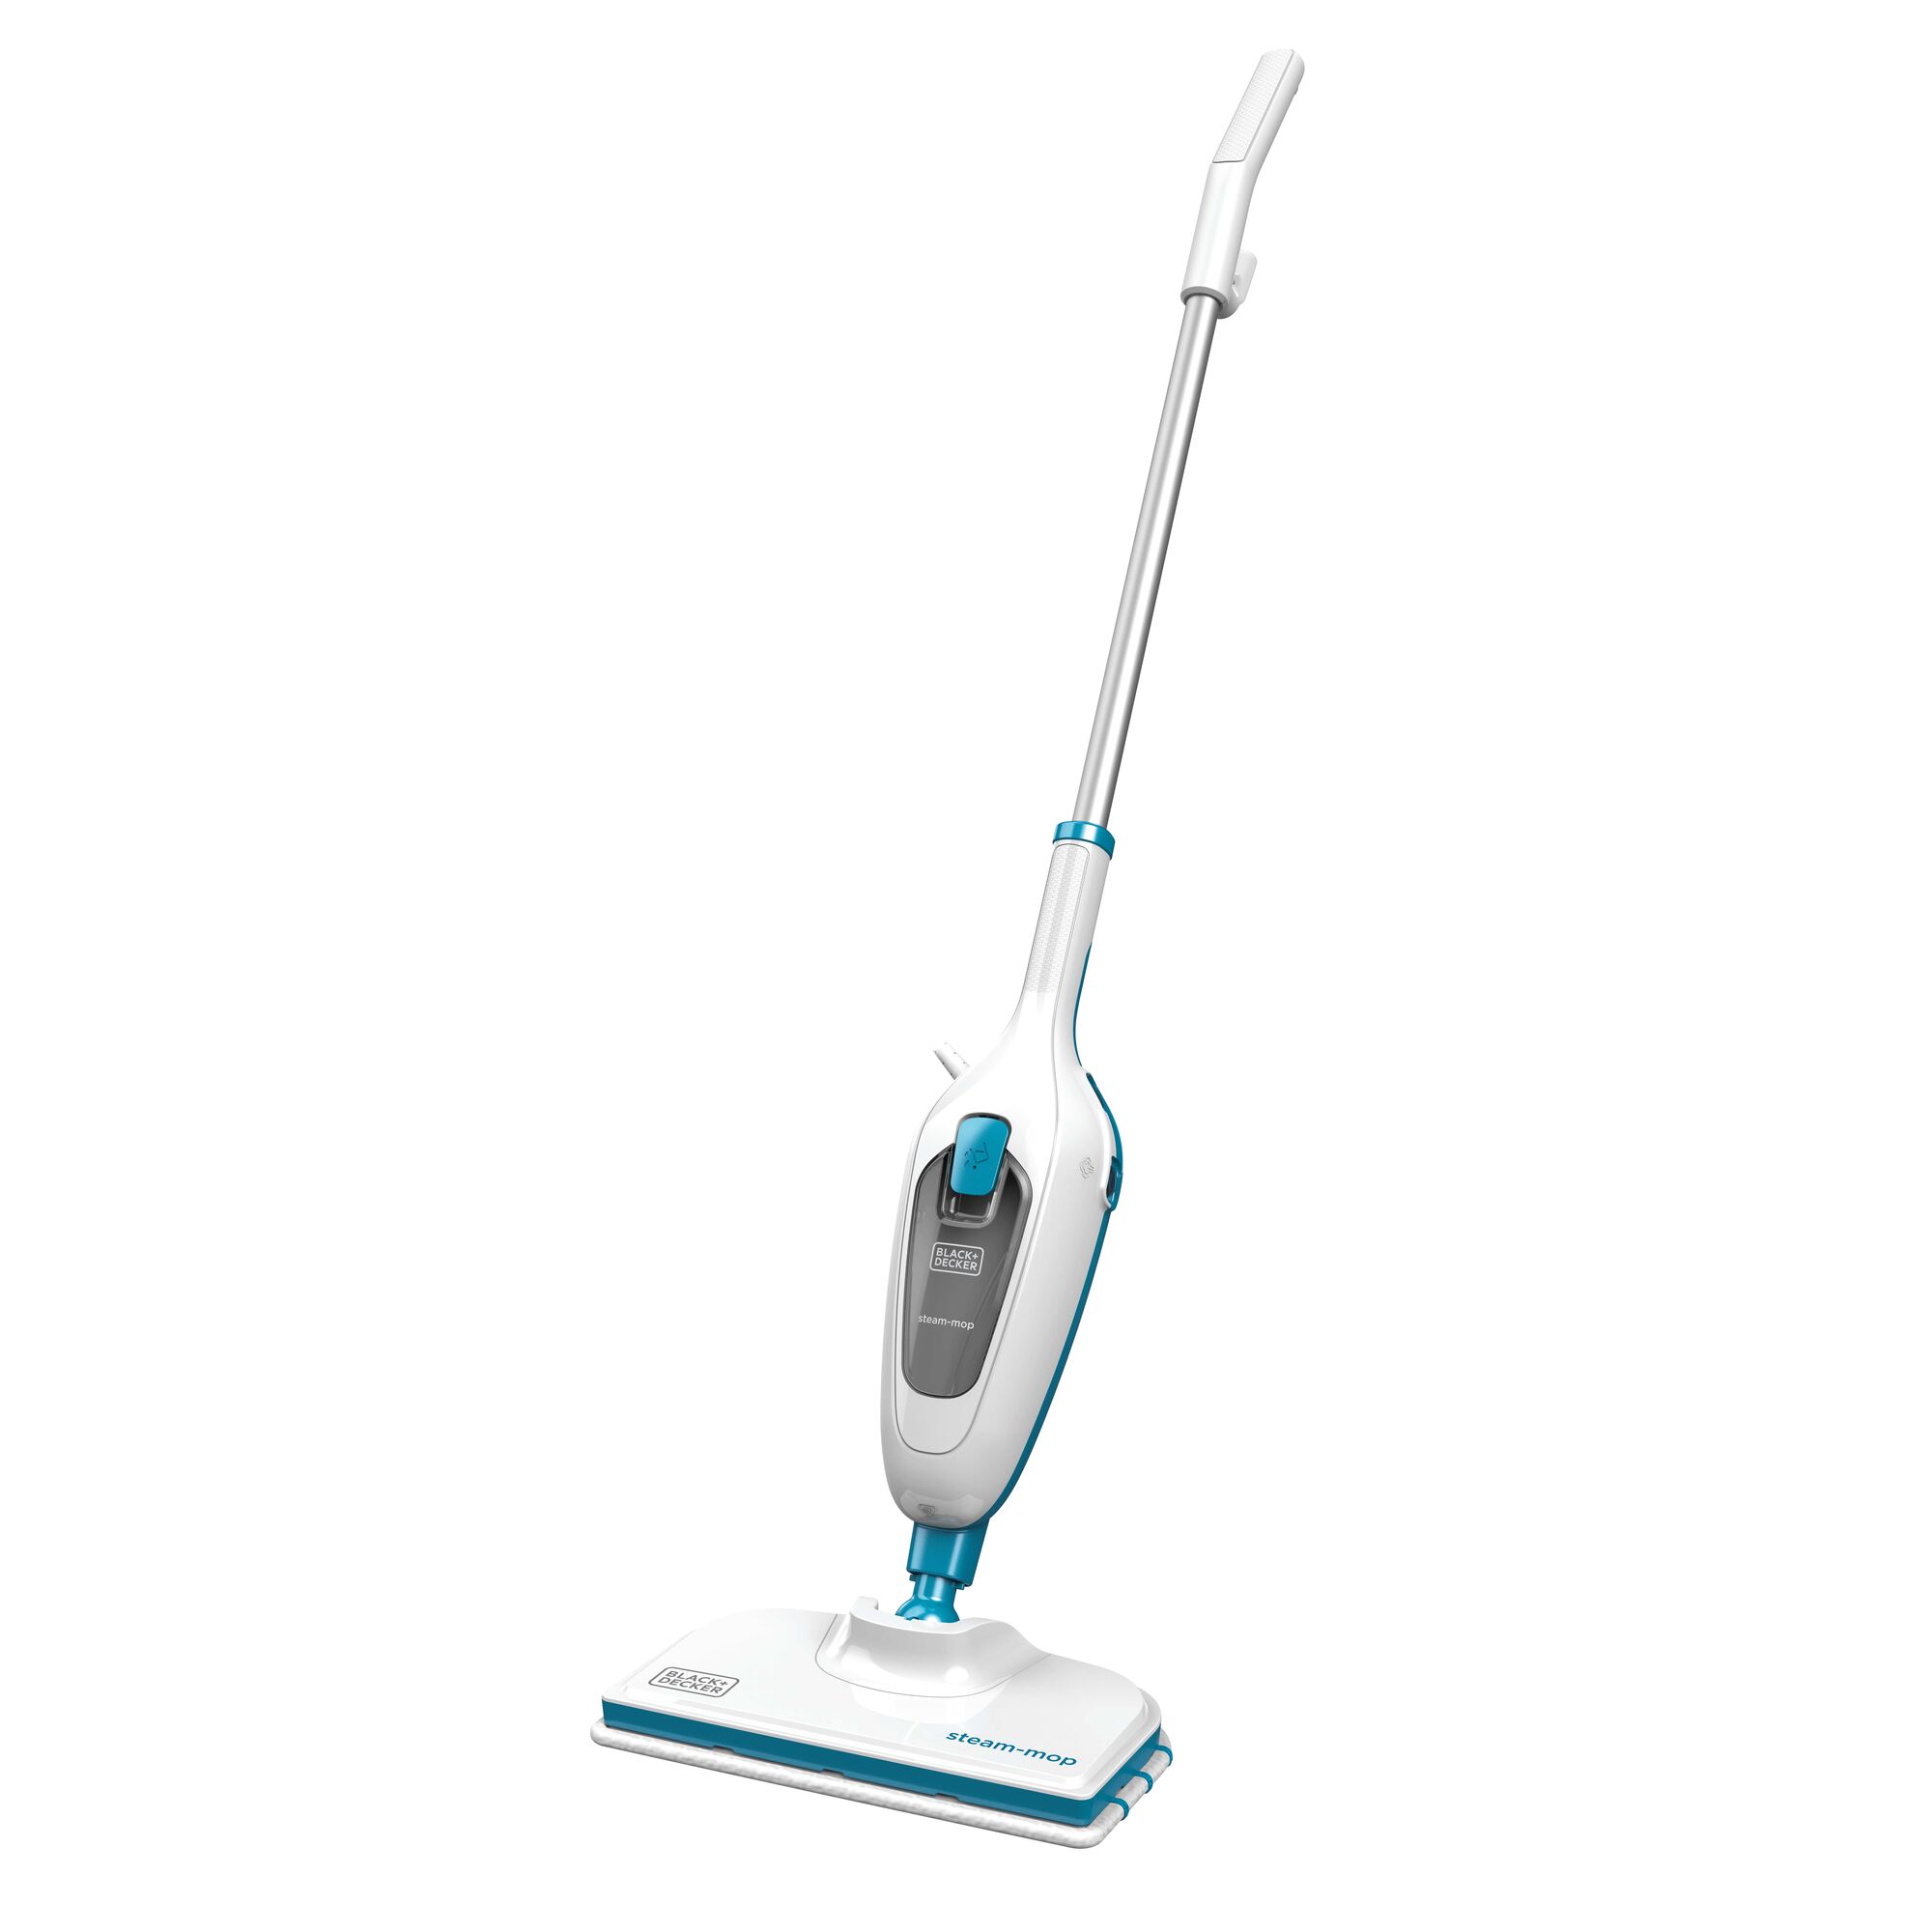 Profile of the steam mop